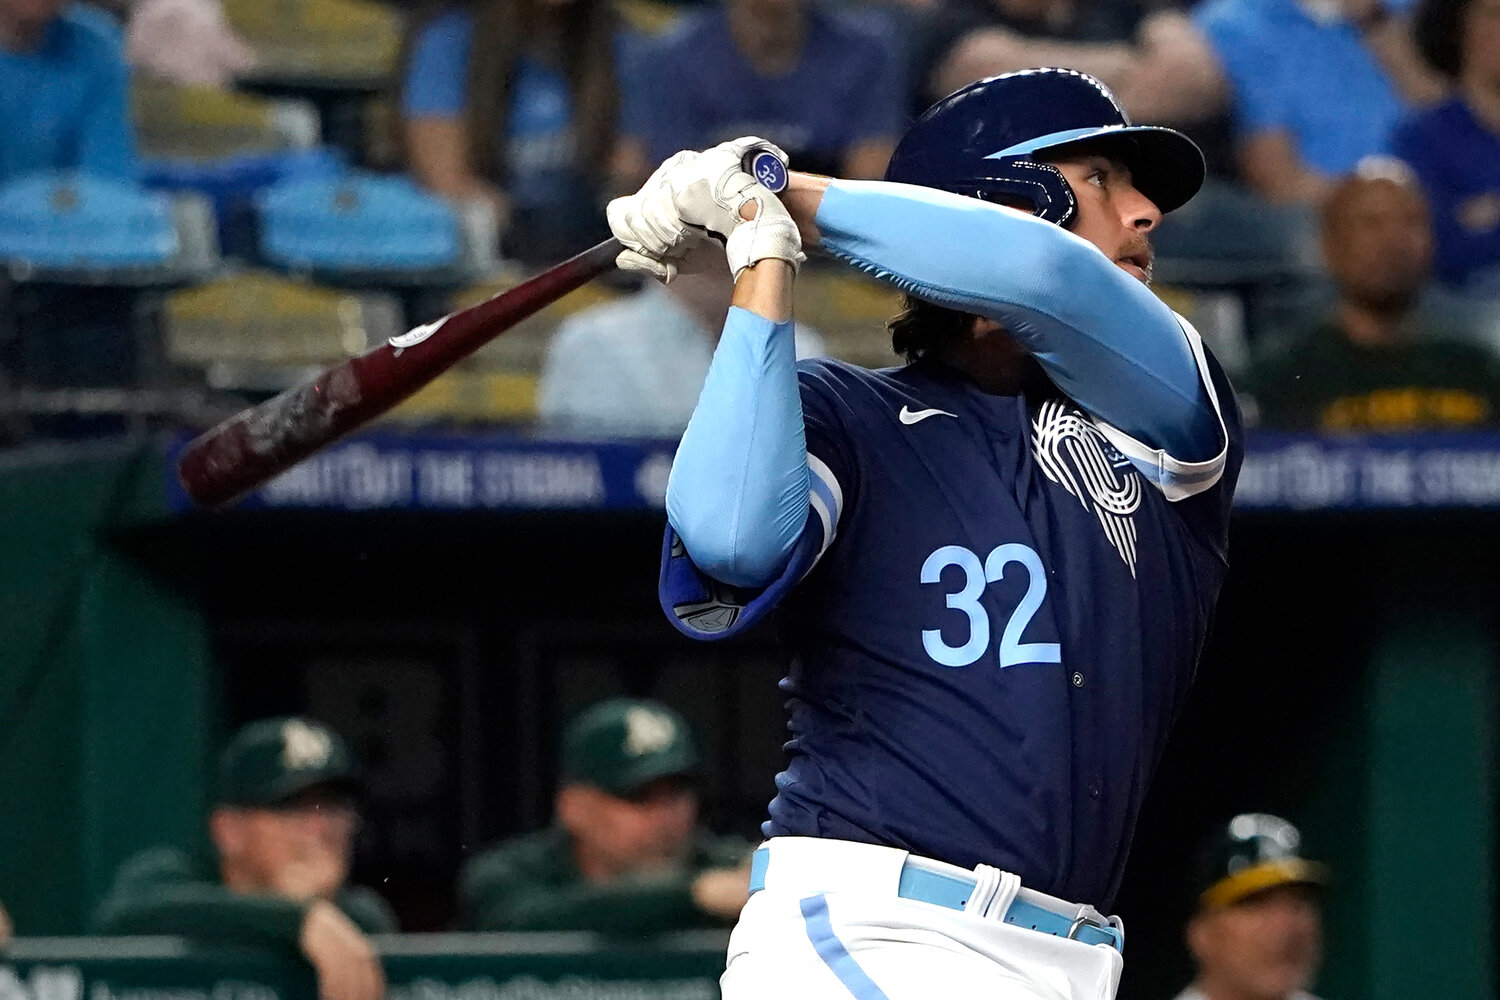 Kansas City Royals' Nick Pratto hits a two-run home run in the fourth inning against the Oakland Athletics during a baseball game Friday, May 5, 2023, in Kansas City, Mo. (AP Photo/Ed Zurga)